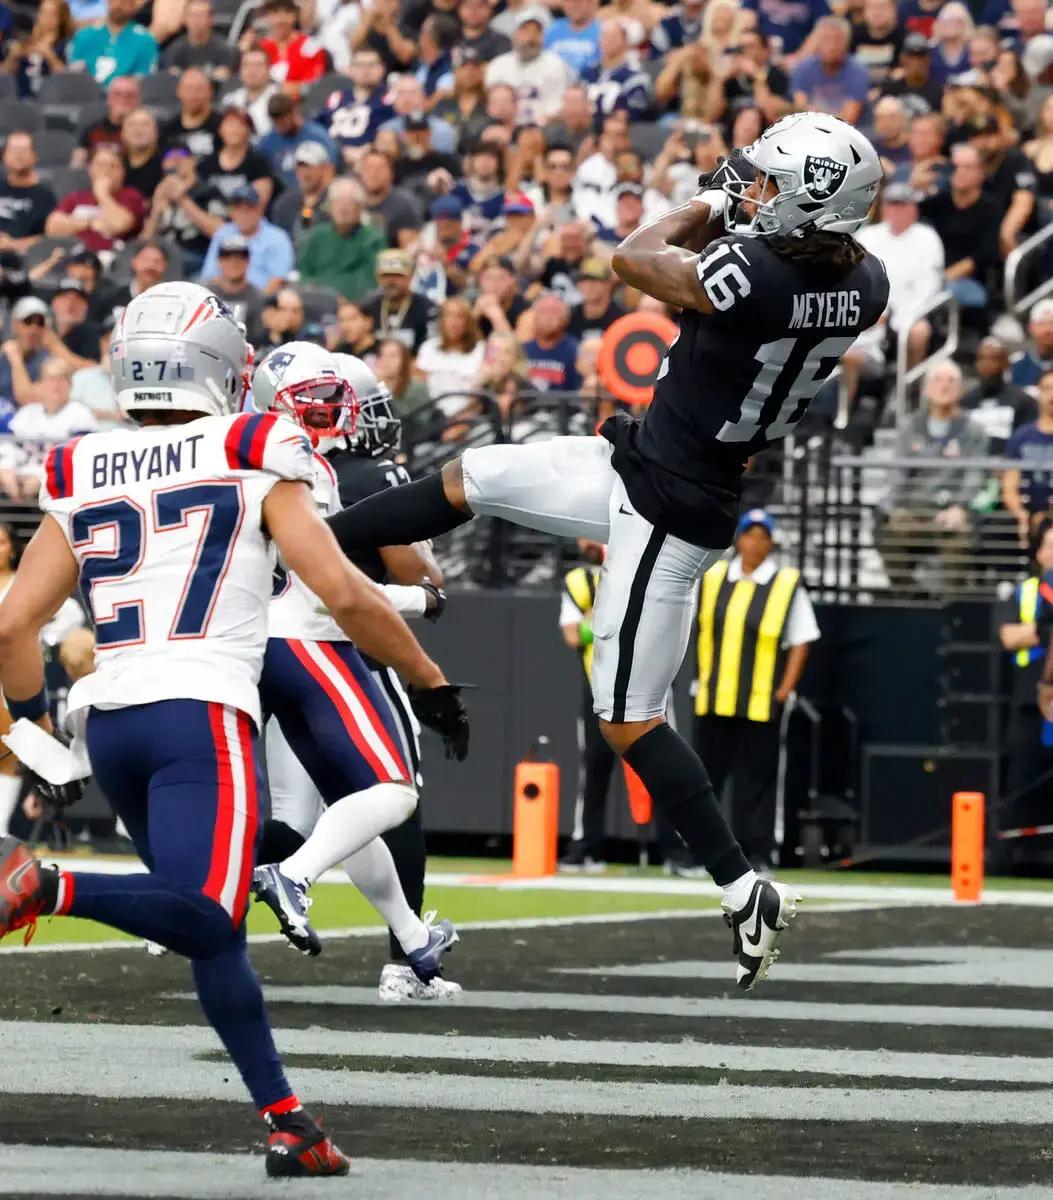 Jakobi Meyers scored his new team's only touchdown against his old team Sunday.